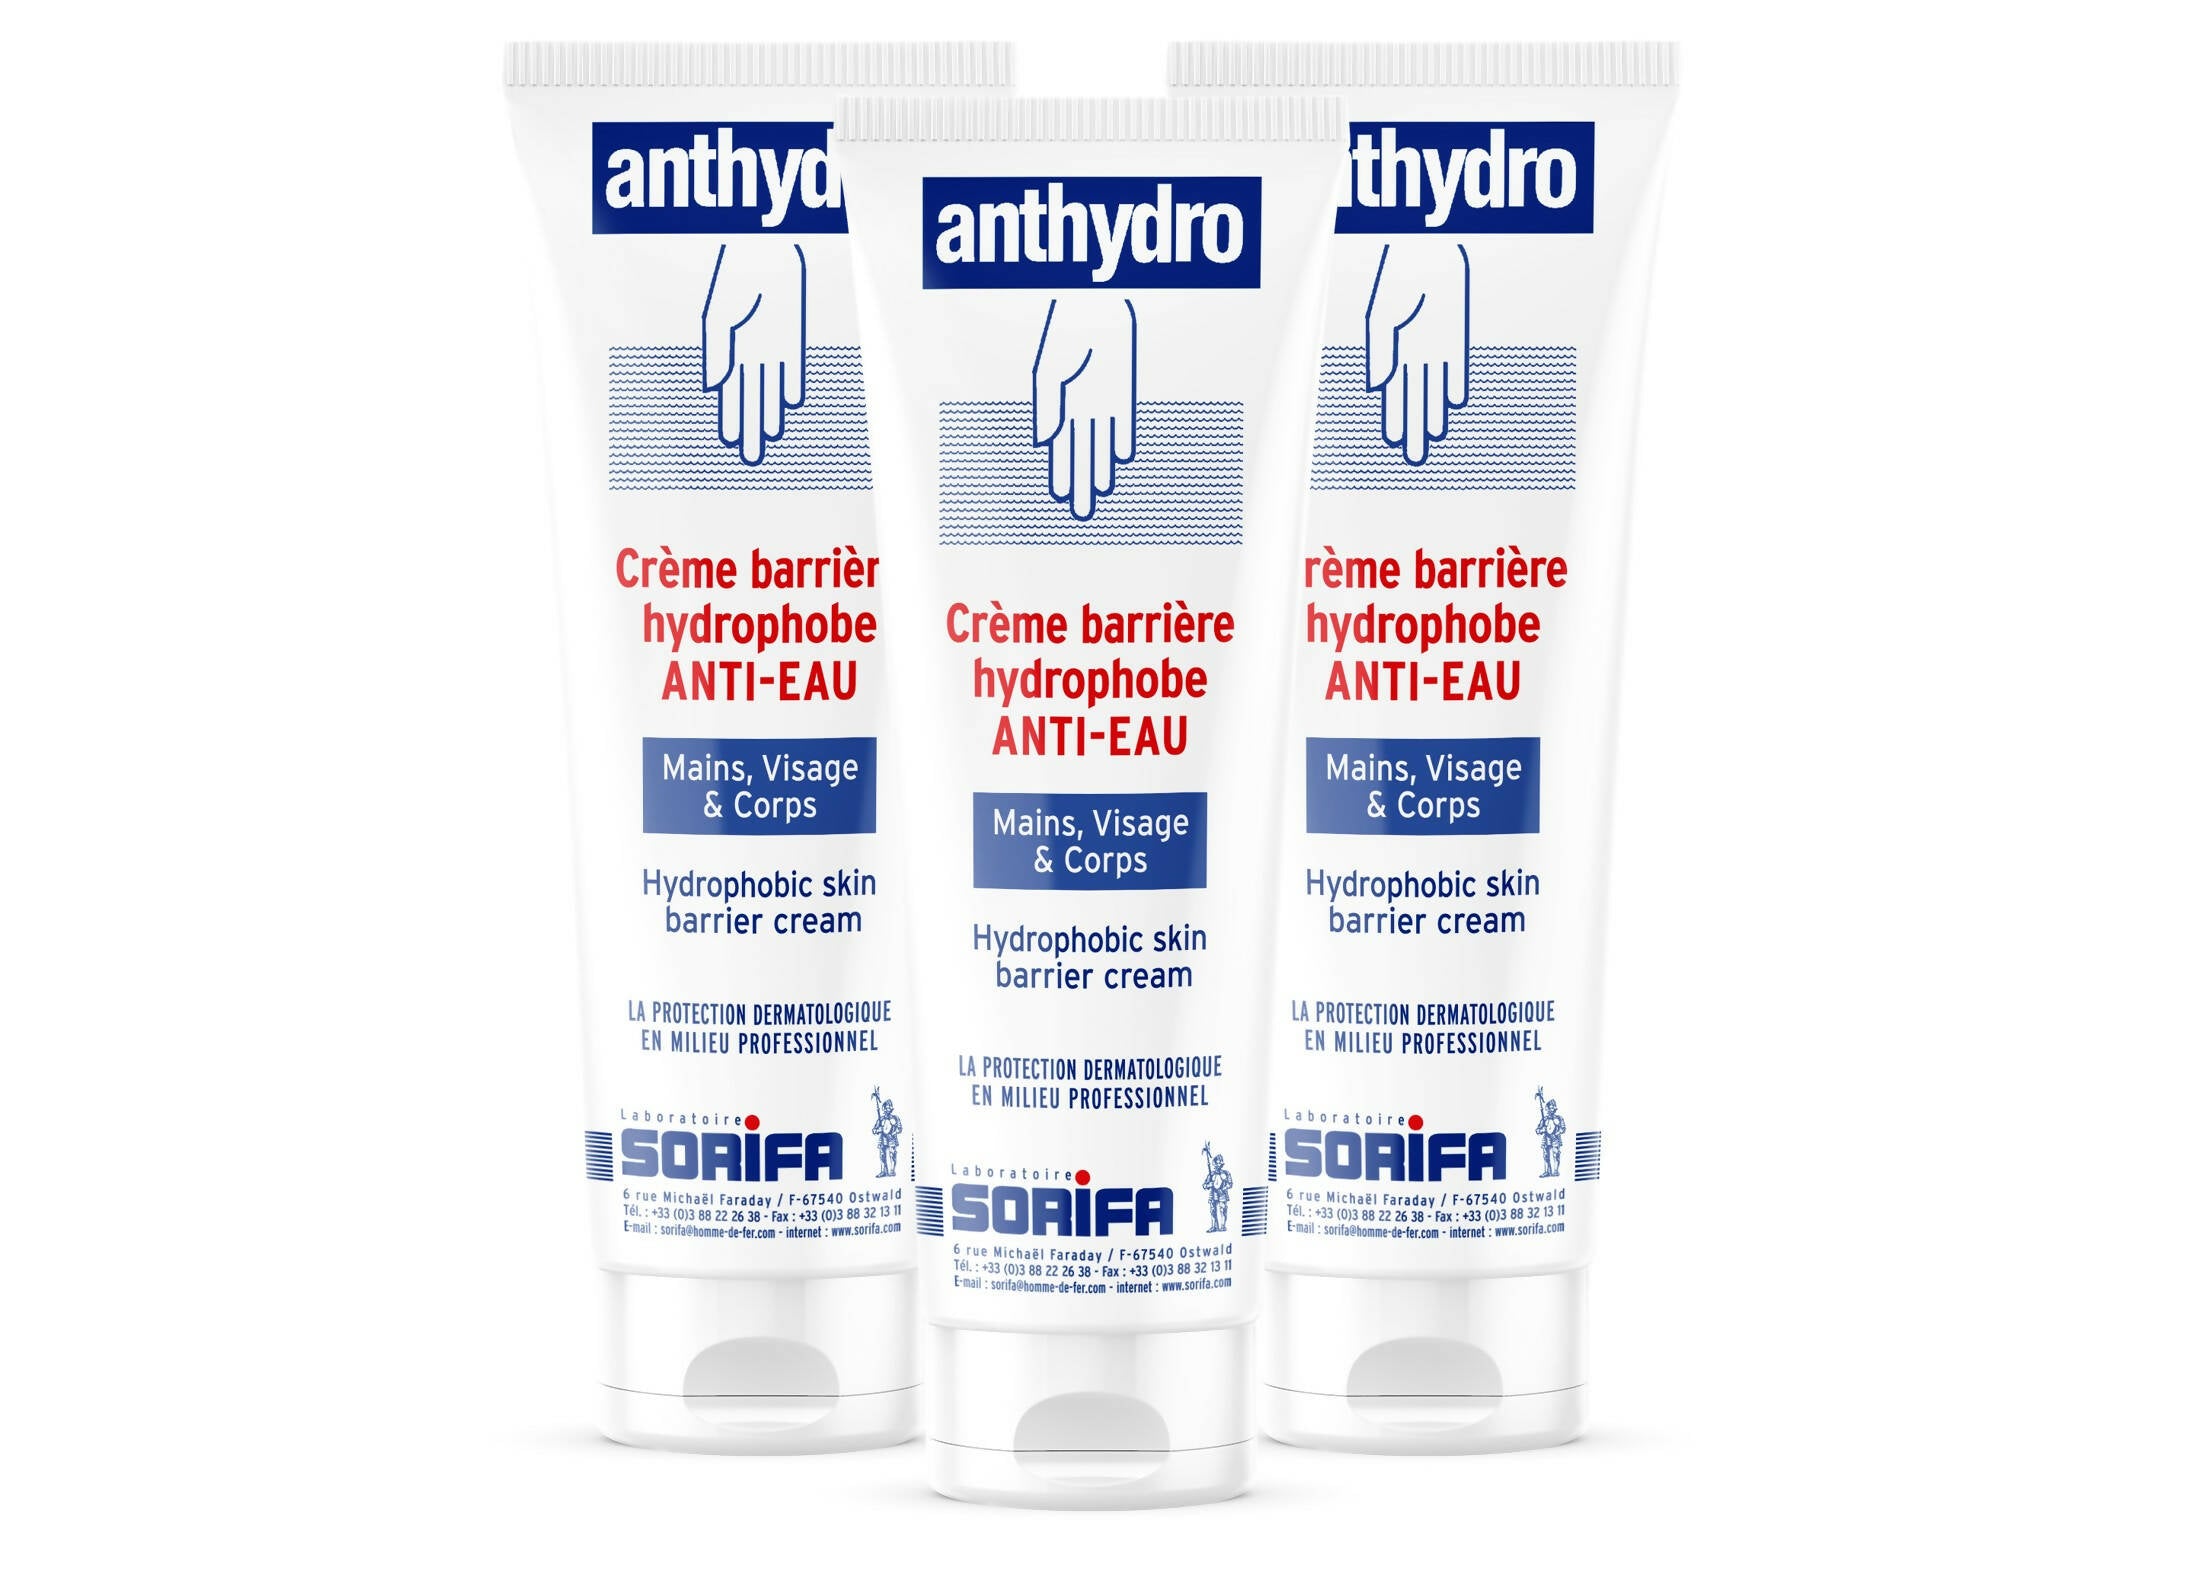 ANT001 - Anthydro Protection hydrophobe Tube 125ml x3